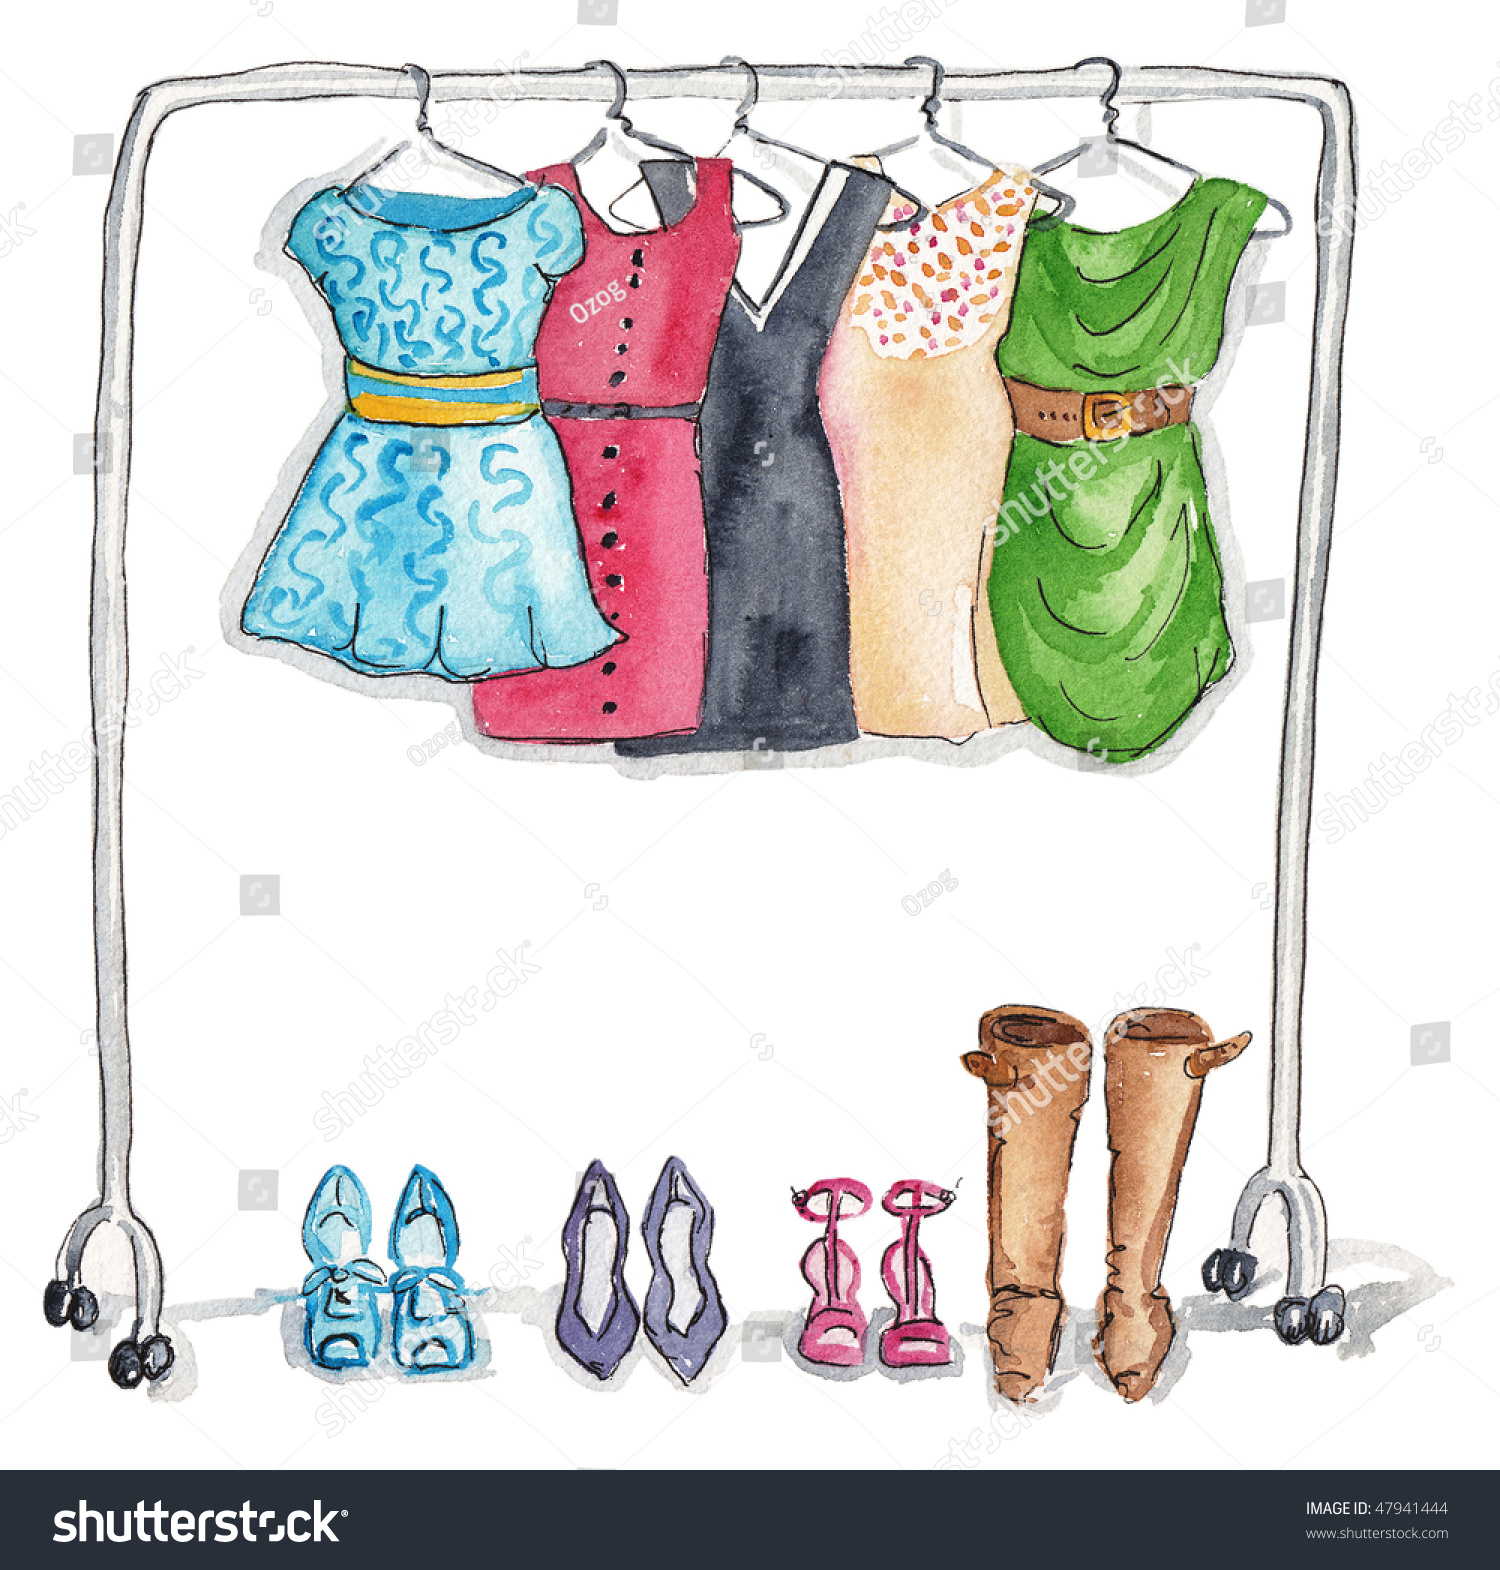 free clipart clothes rack - photo #3